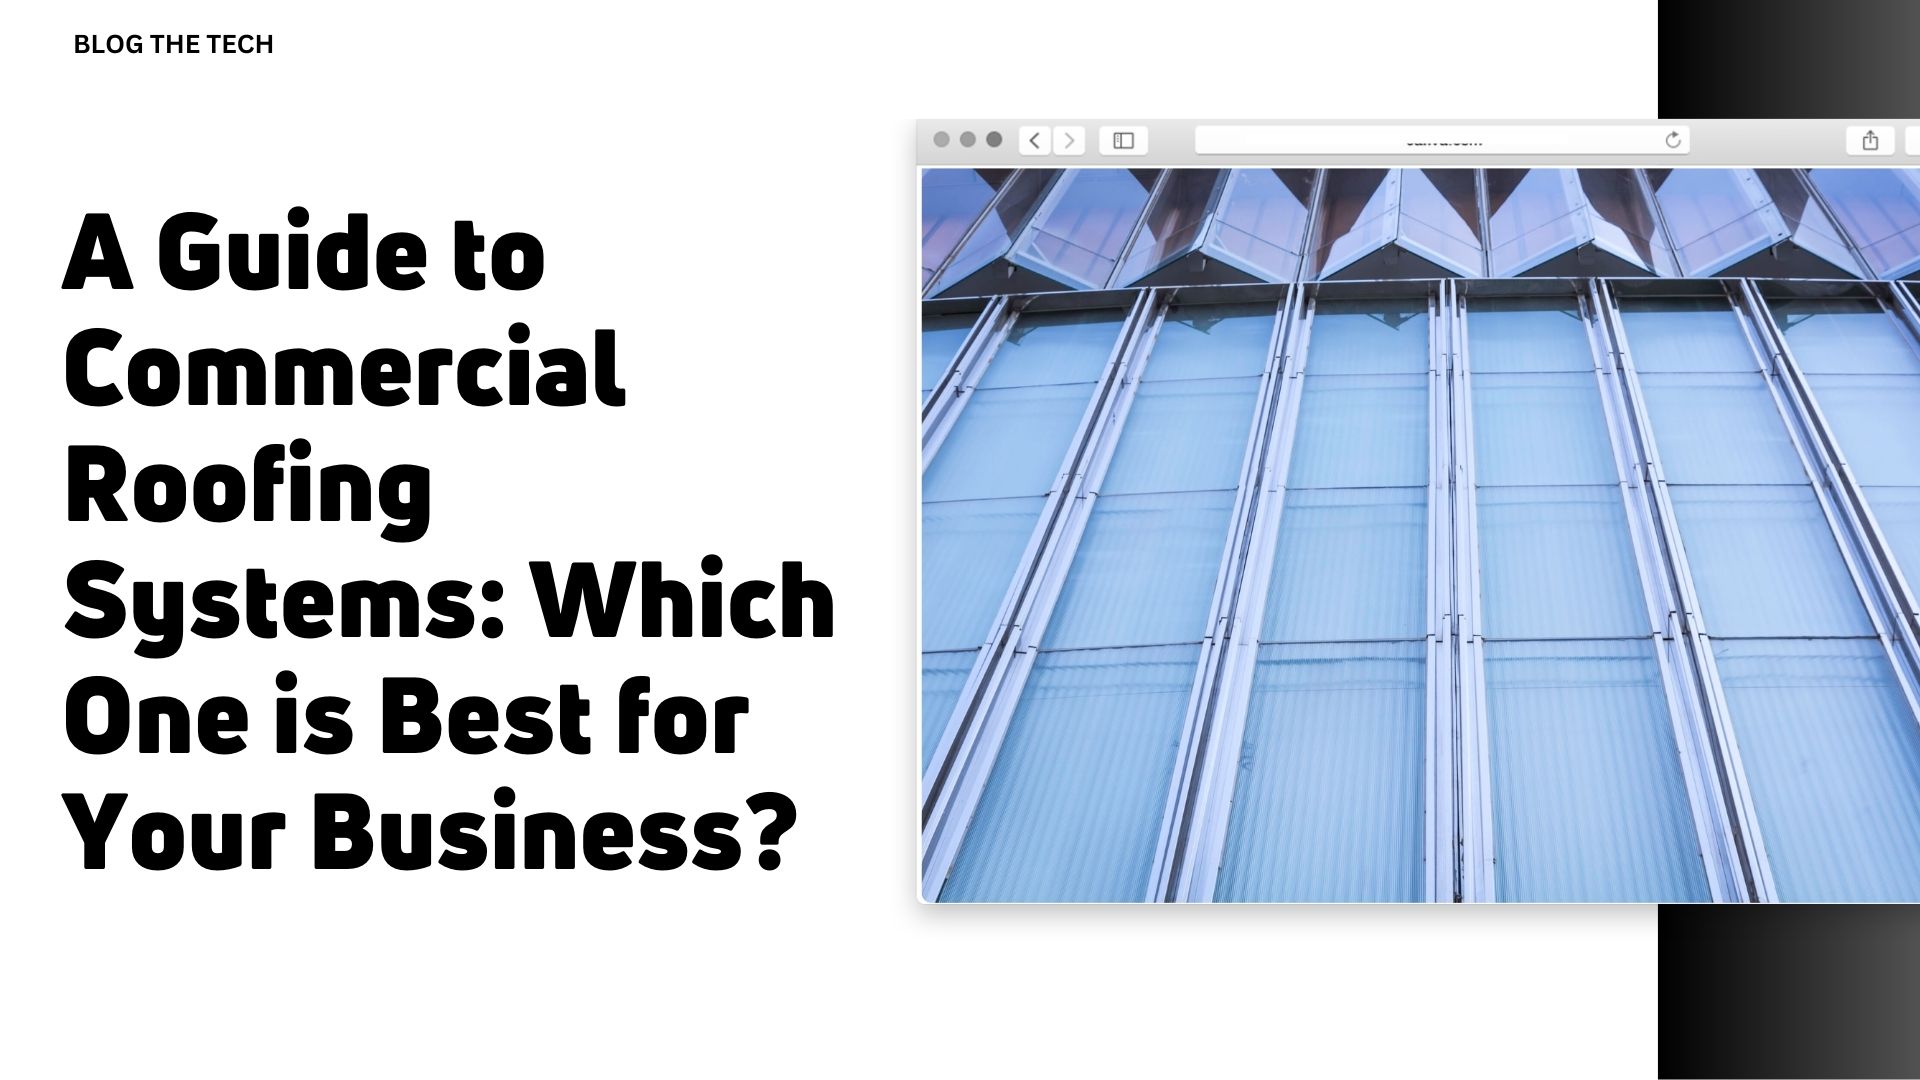 A Guide to Commercial Roofing Systems: Which One is Best for Your Business?